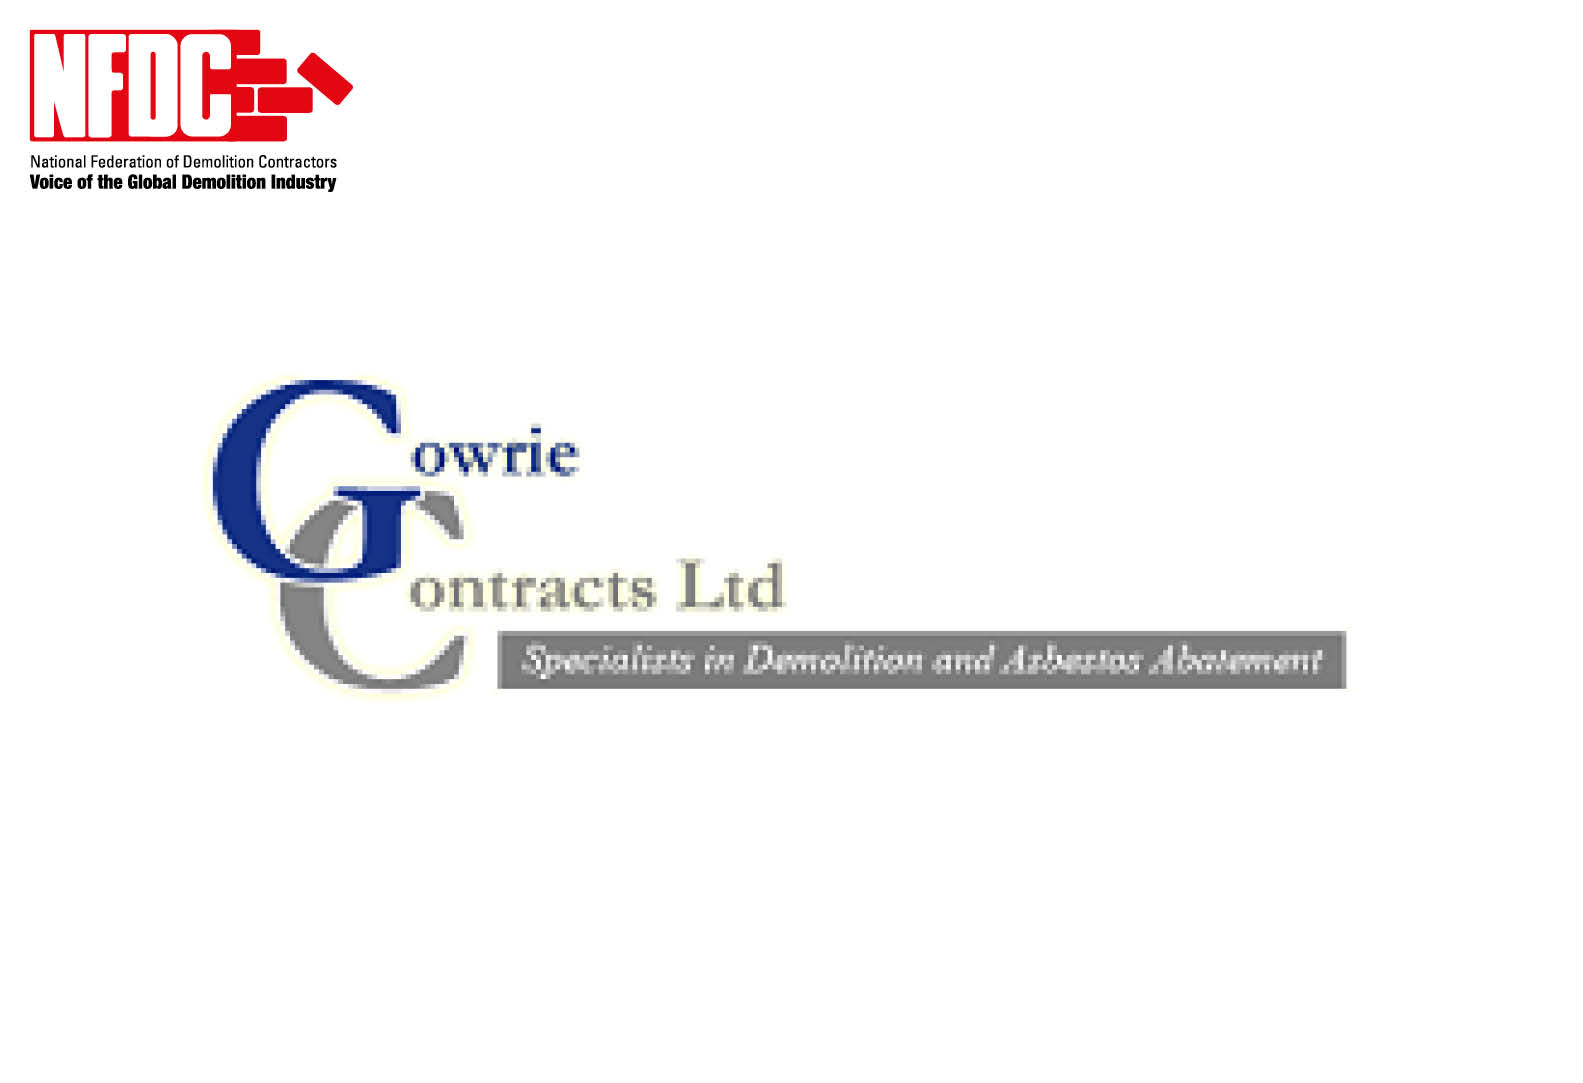 Gowrie Contracts Ltd